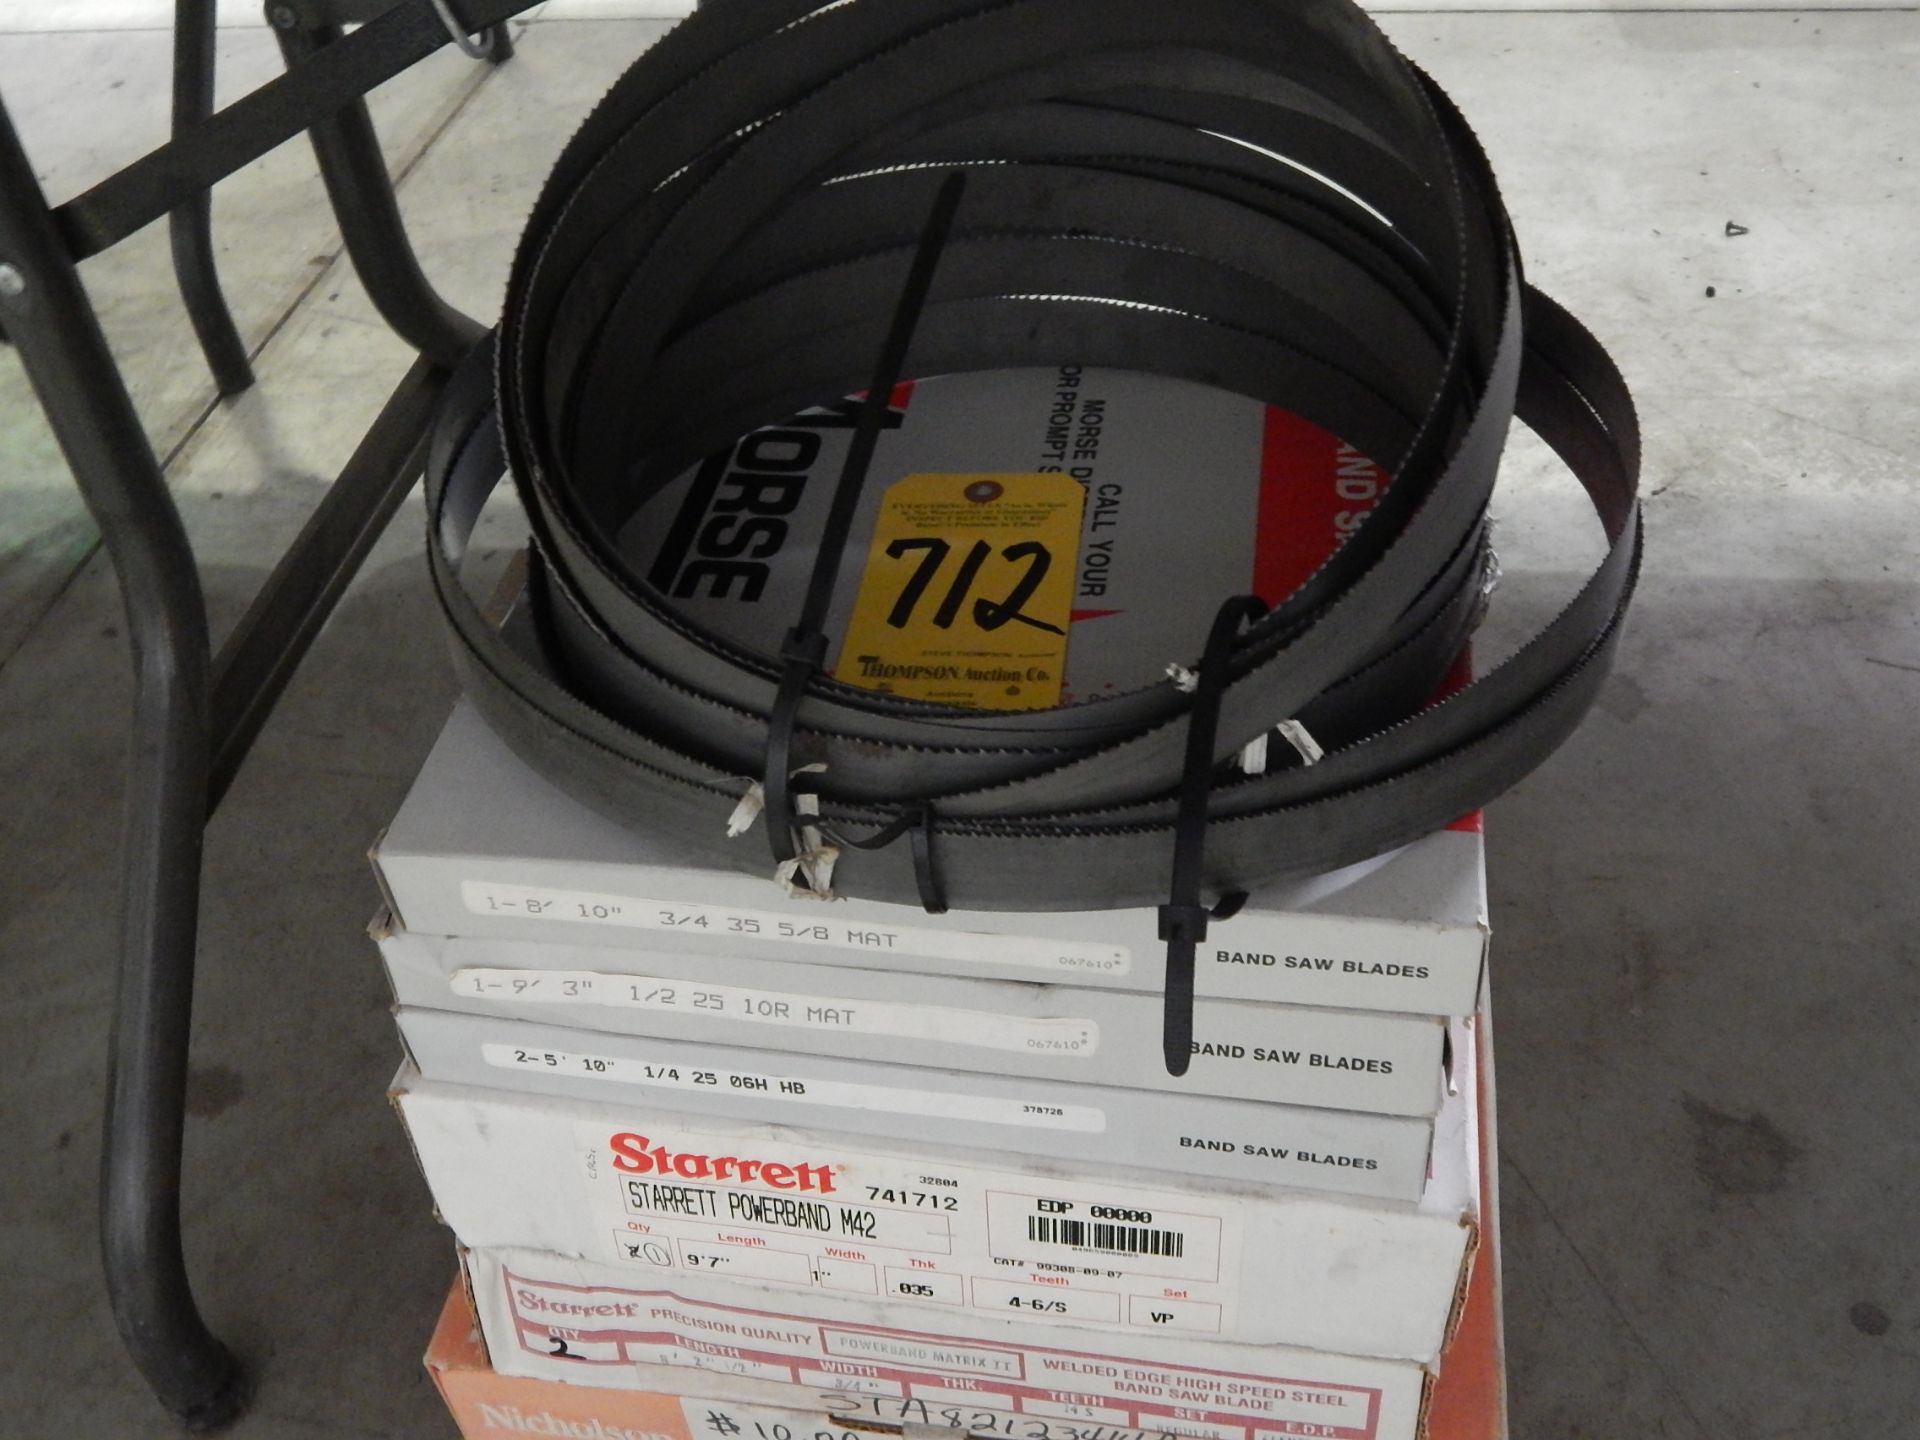 Miscellaneous Bandsaw Blades